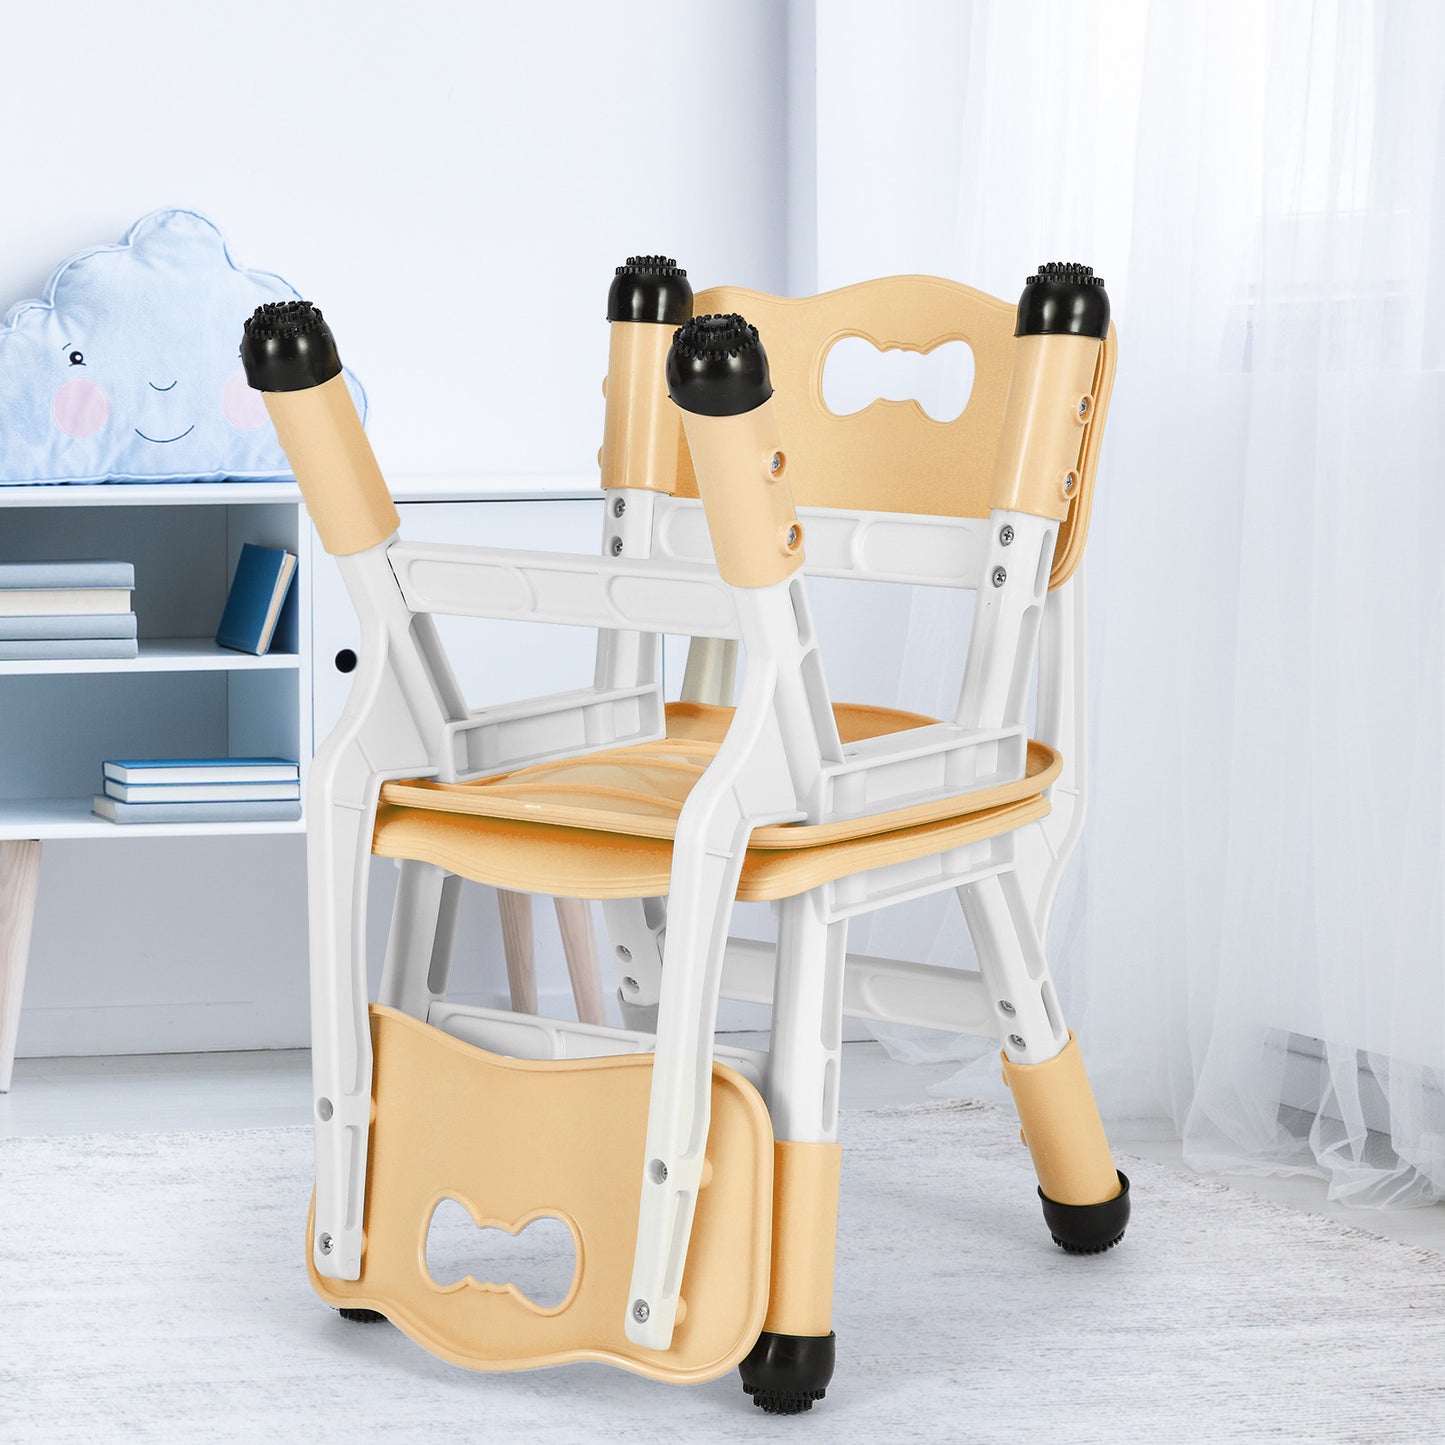 Arlopu 2pcs Adjustable Kids Chair, 3 Levels Adjustable Stackable Toddler Chairs, Maximum Load-Bearing 220Lb, Ergonomic Children Seats for Classroom/Daycare/Familiy